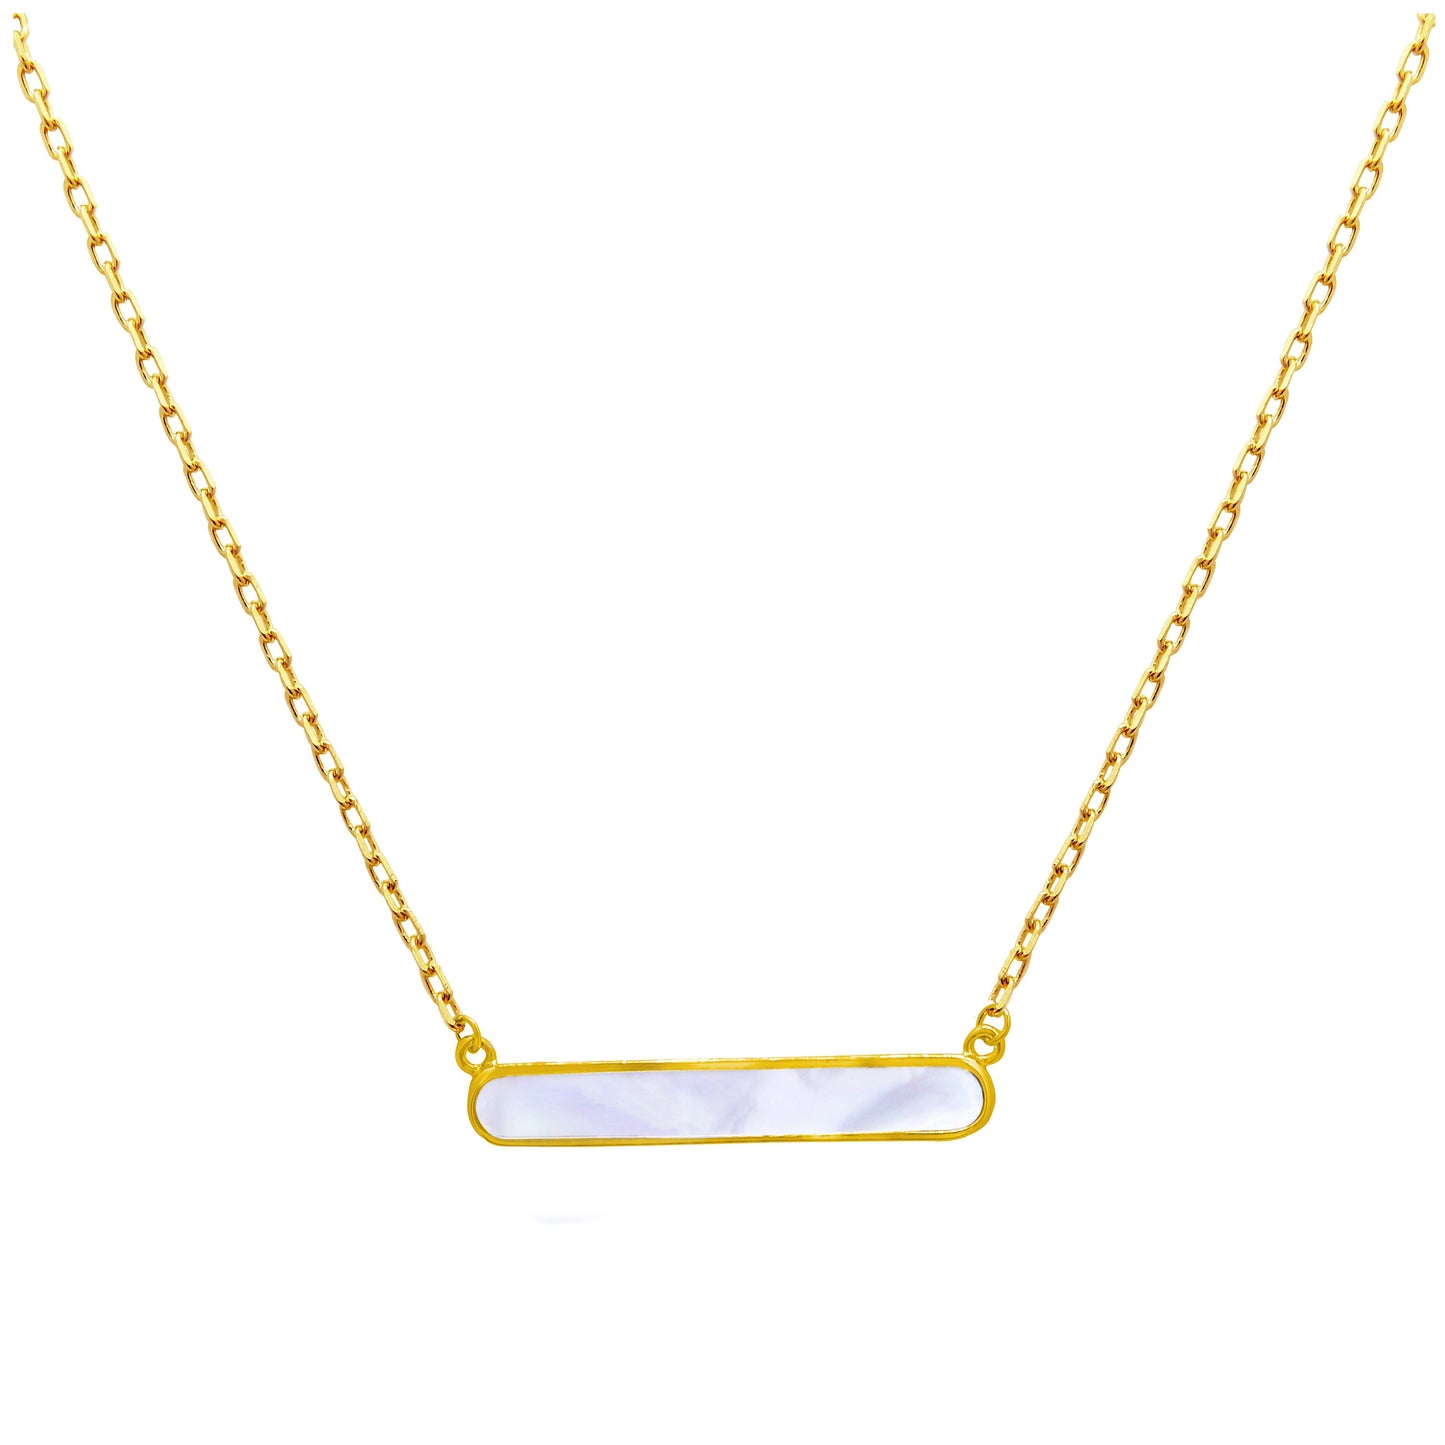 Gold Plated Sterling Silver Mother of Pearl Bar Necklace 18"